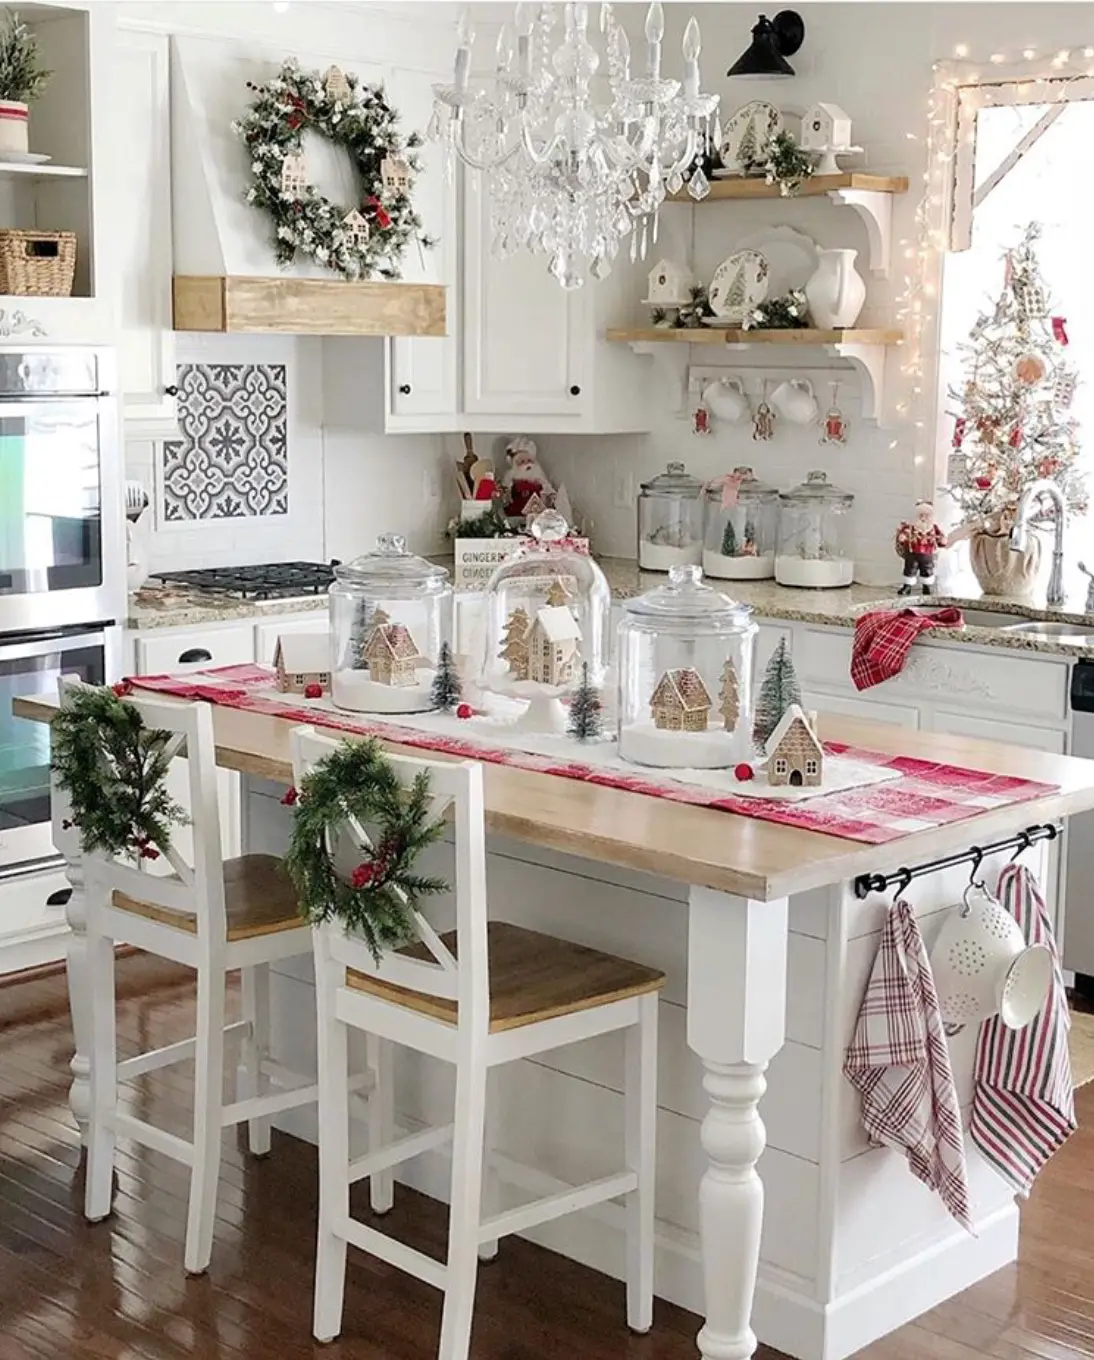 14 Elegant Christmas Tablescape Ideas To Try - The Wonder Cottage